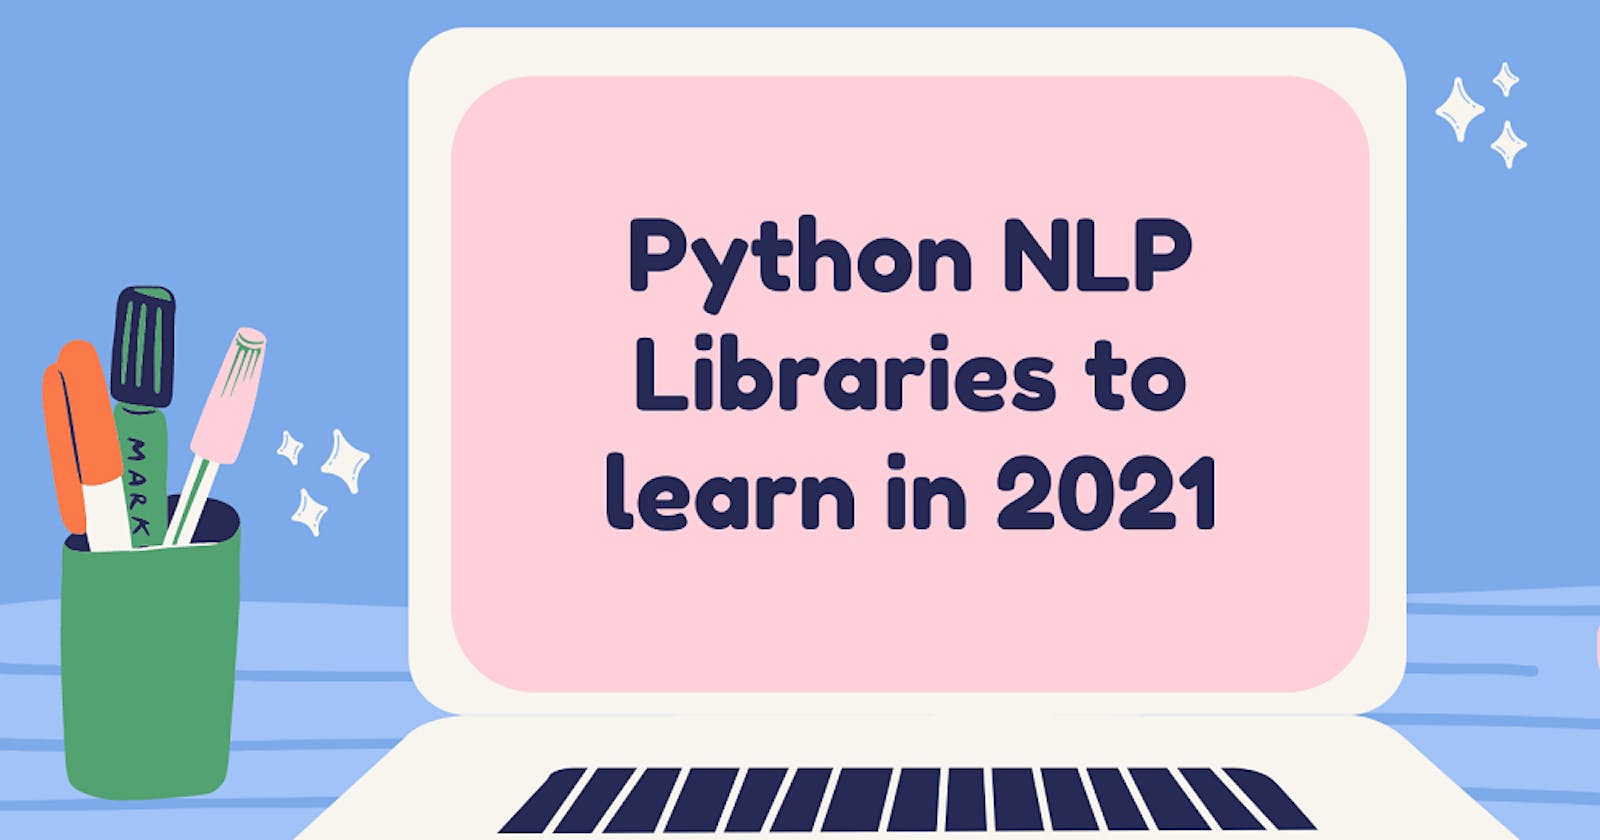 Python NLP libraries to learn and use in 2021